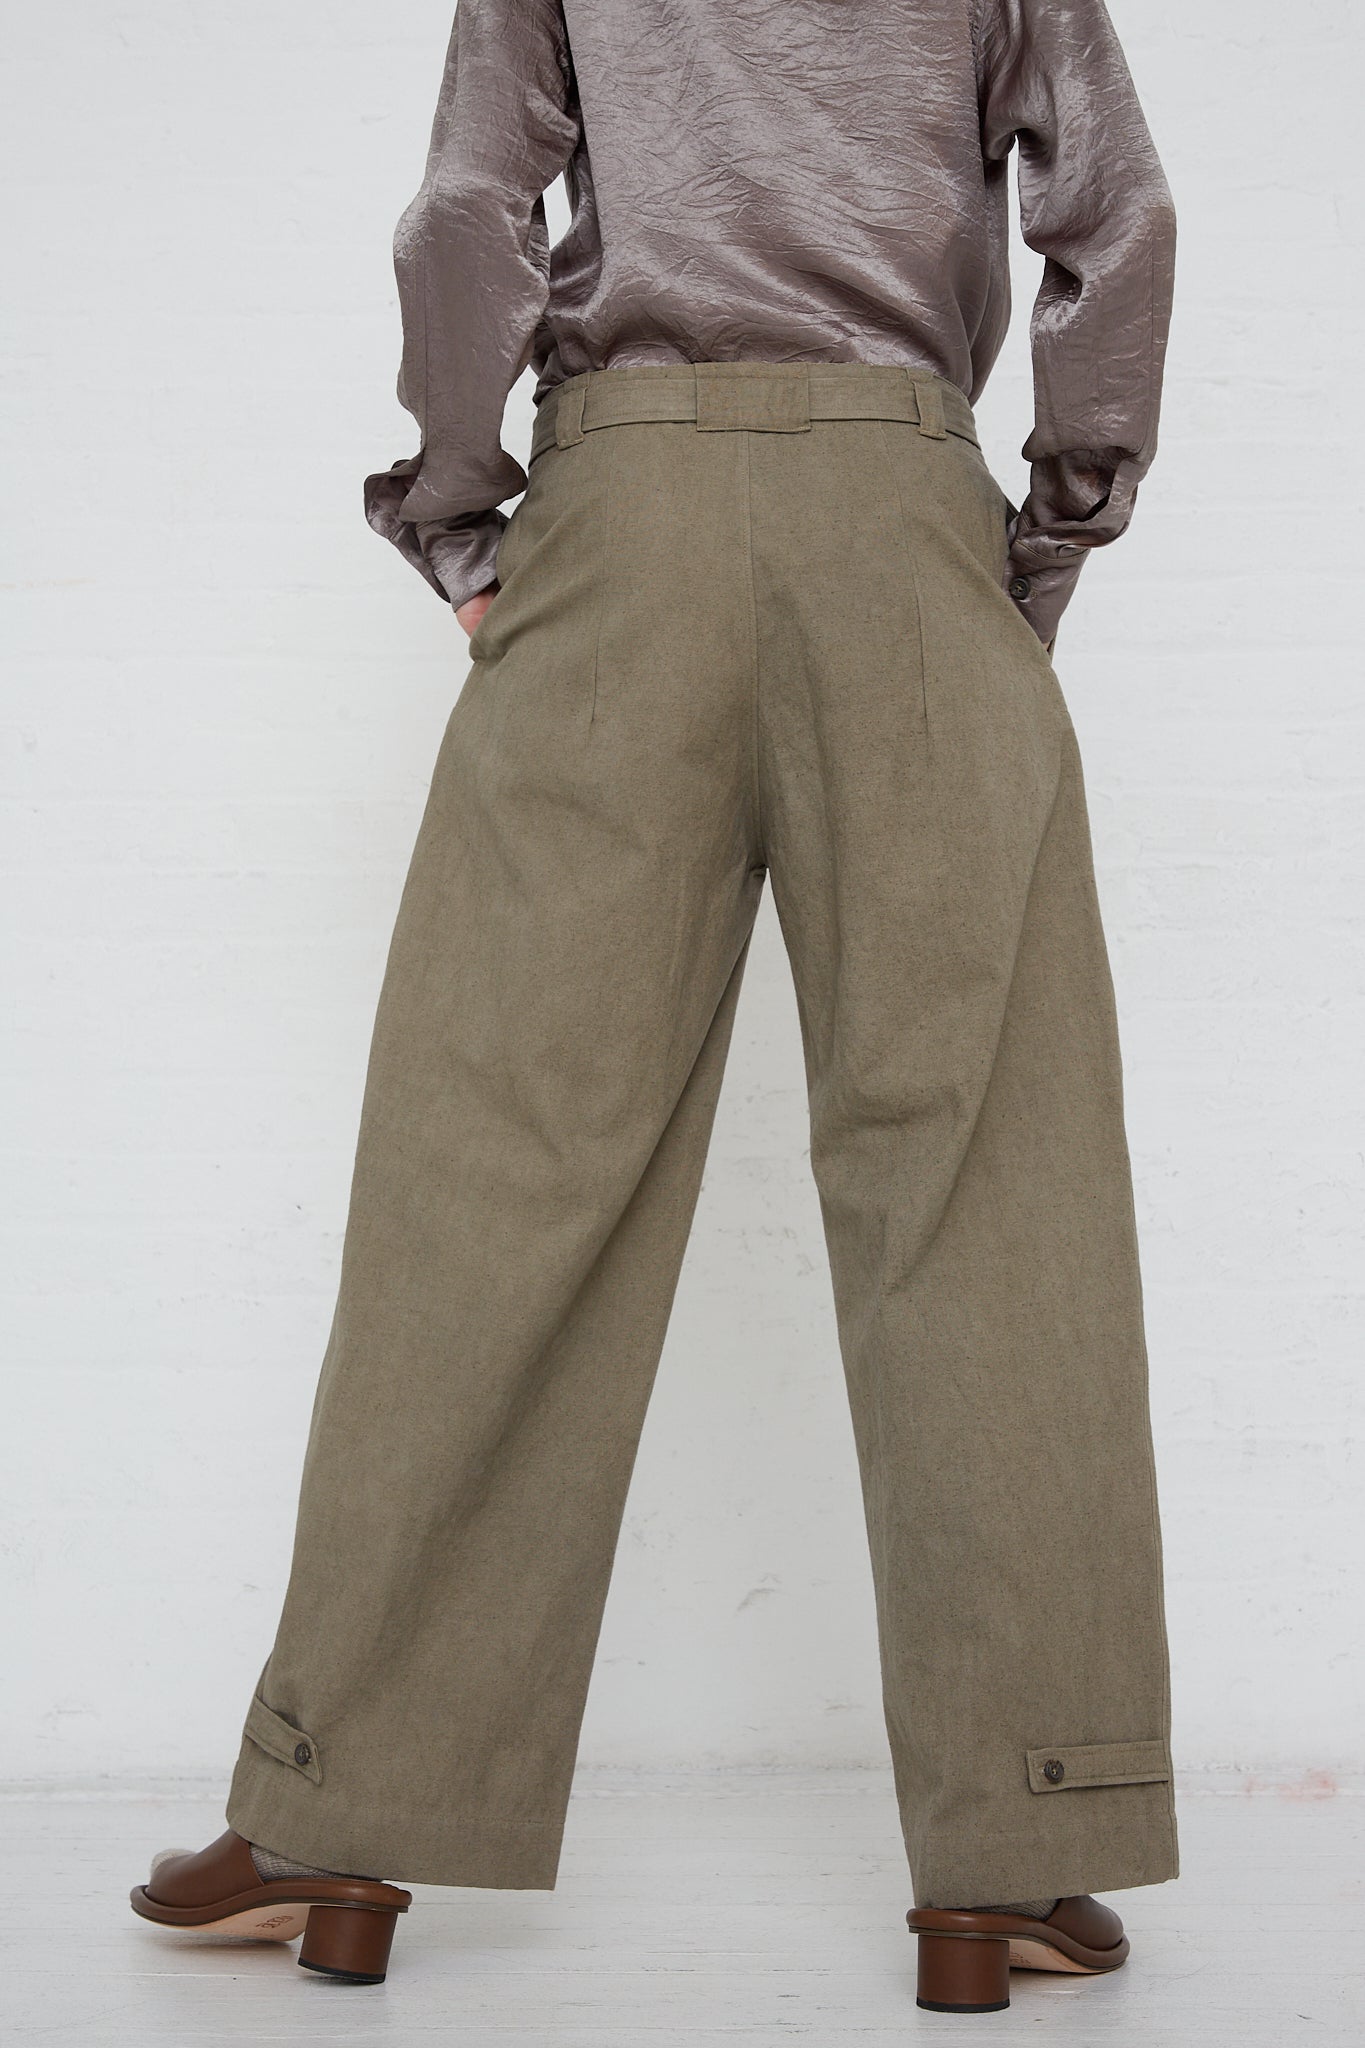 The back view of a woman wearing the Lauren Manoogian Belted Trouser in Fatigue, made from a cotton linen blend.